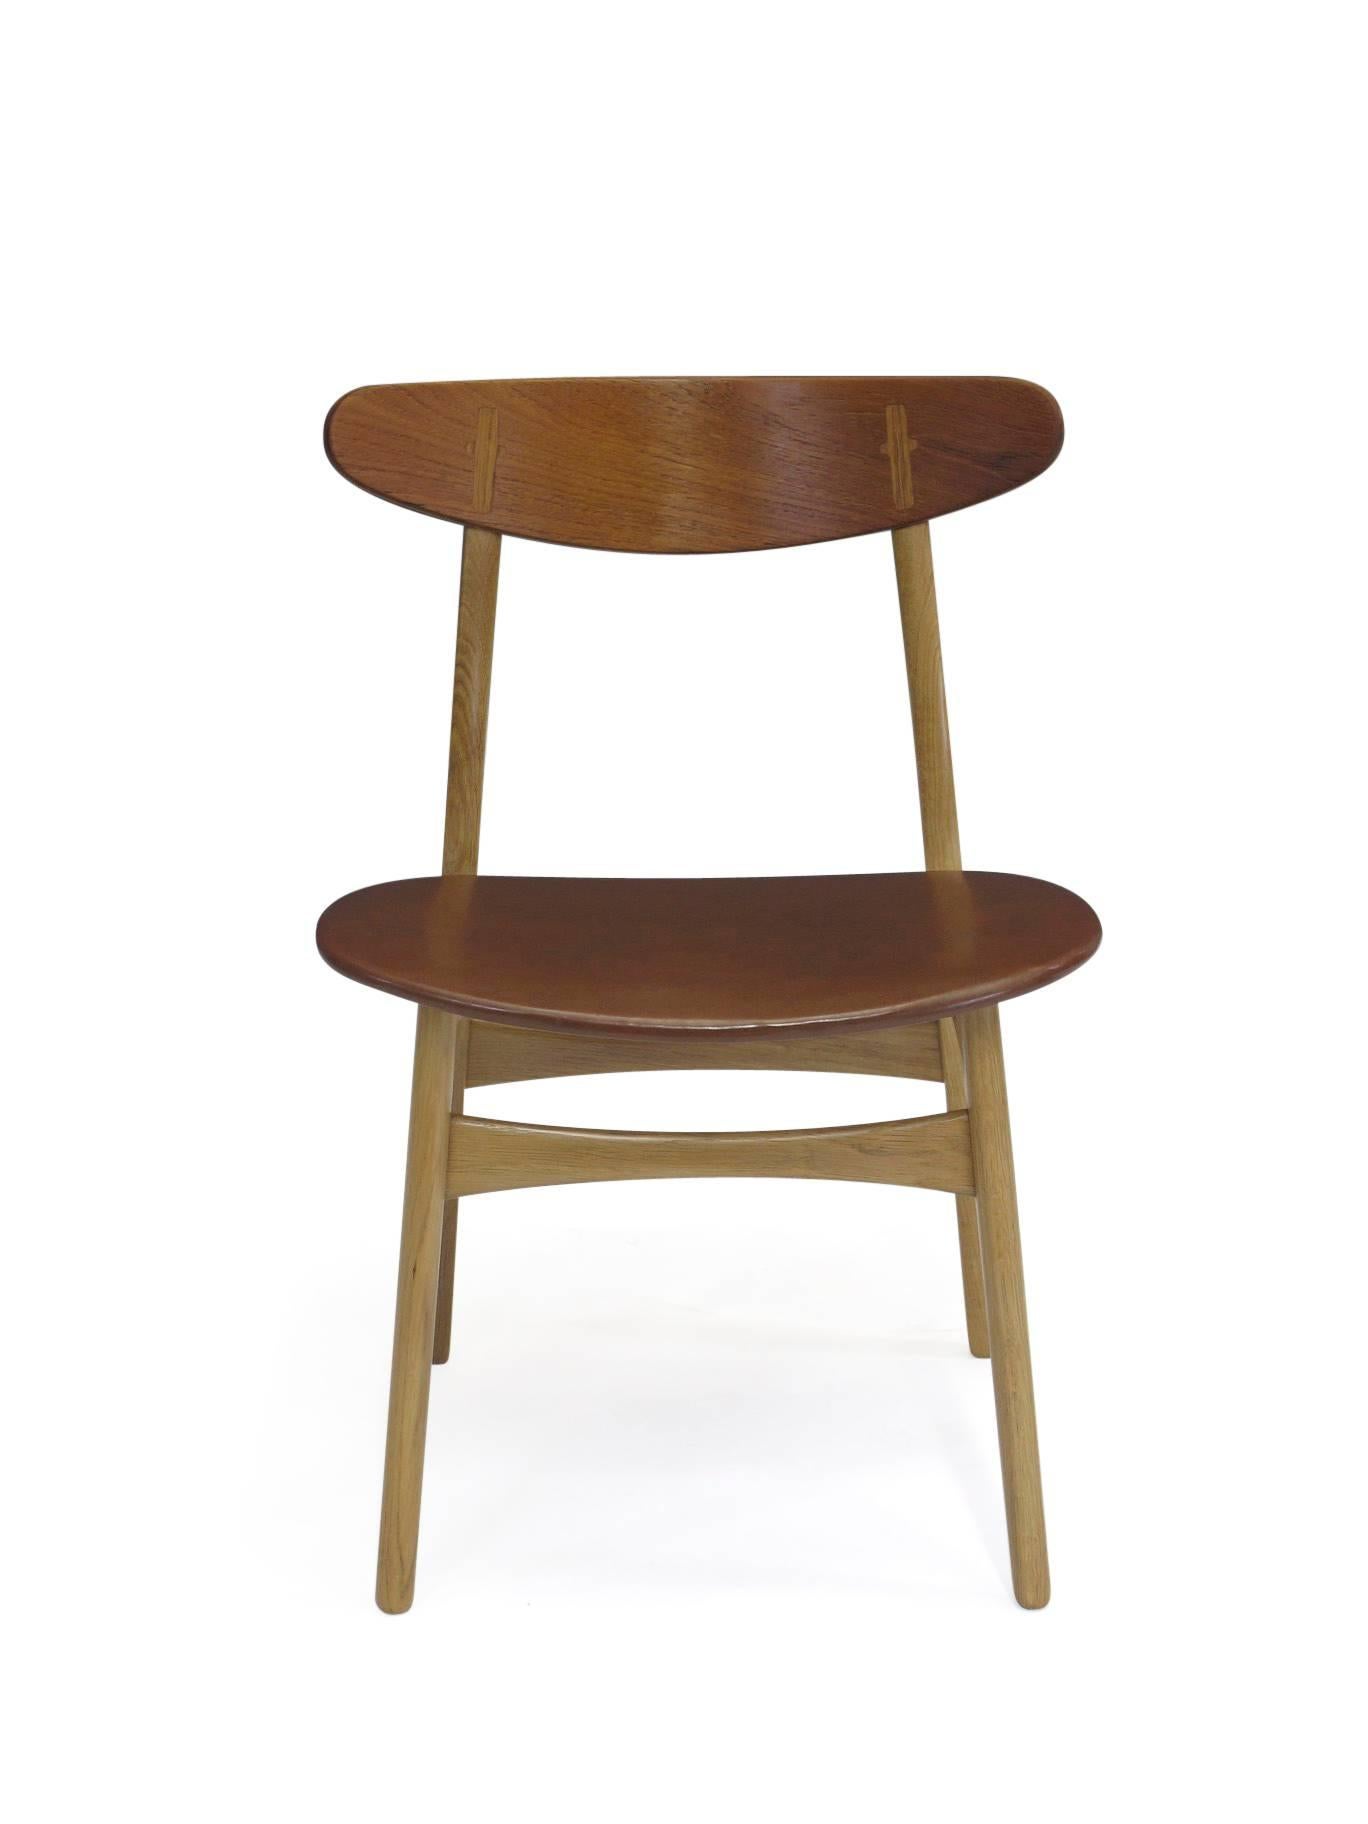 Hans Wegner for Carl Hansen & Sons, model CH30 dining chairs in white oak with teak backs, and vintage brown vinyl seats. The frames have been professionally restored, and in excellent condition.